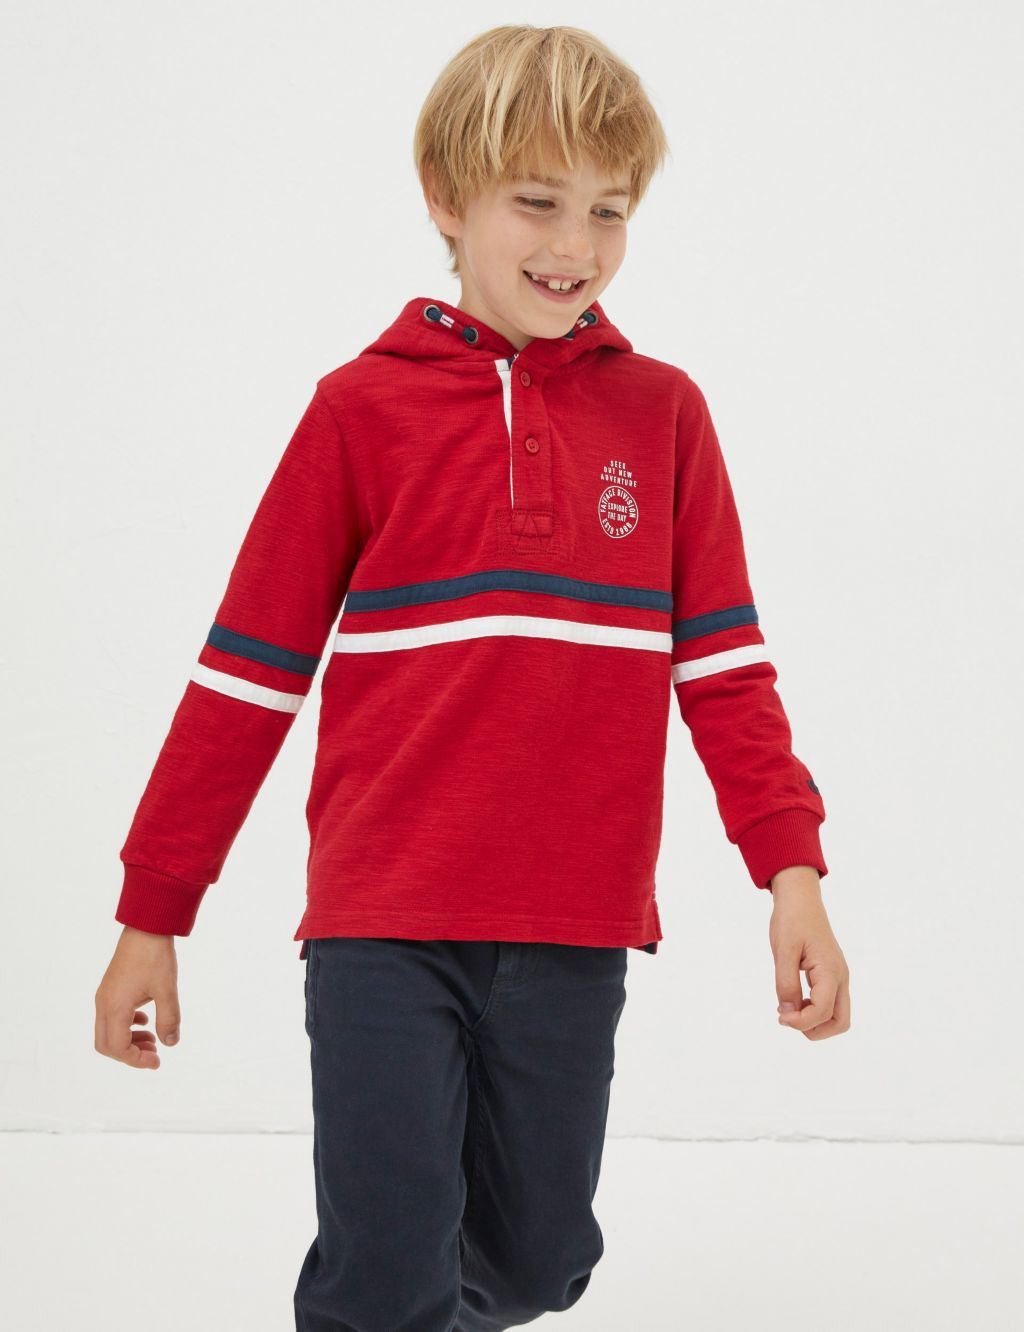 Boys’ Red Tops | M&S